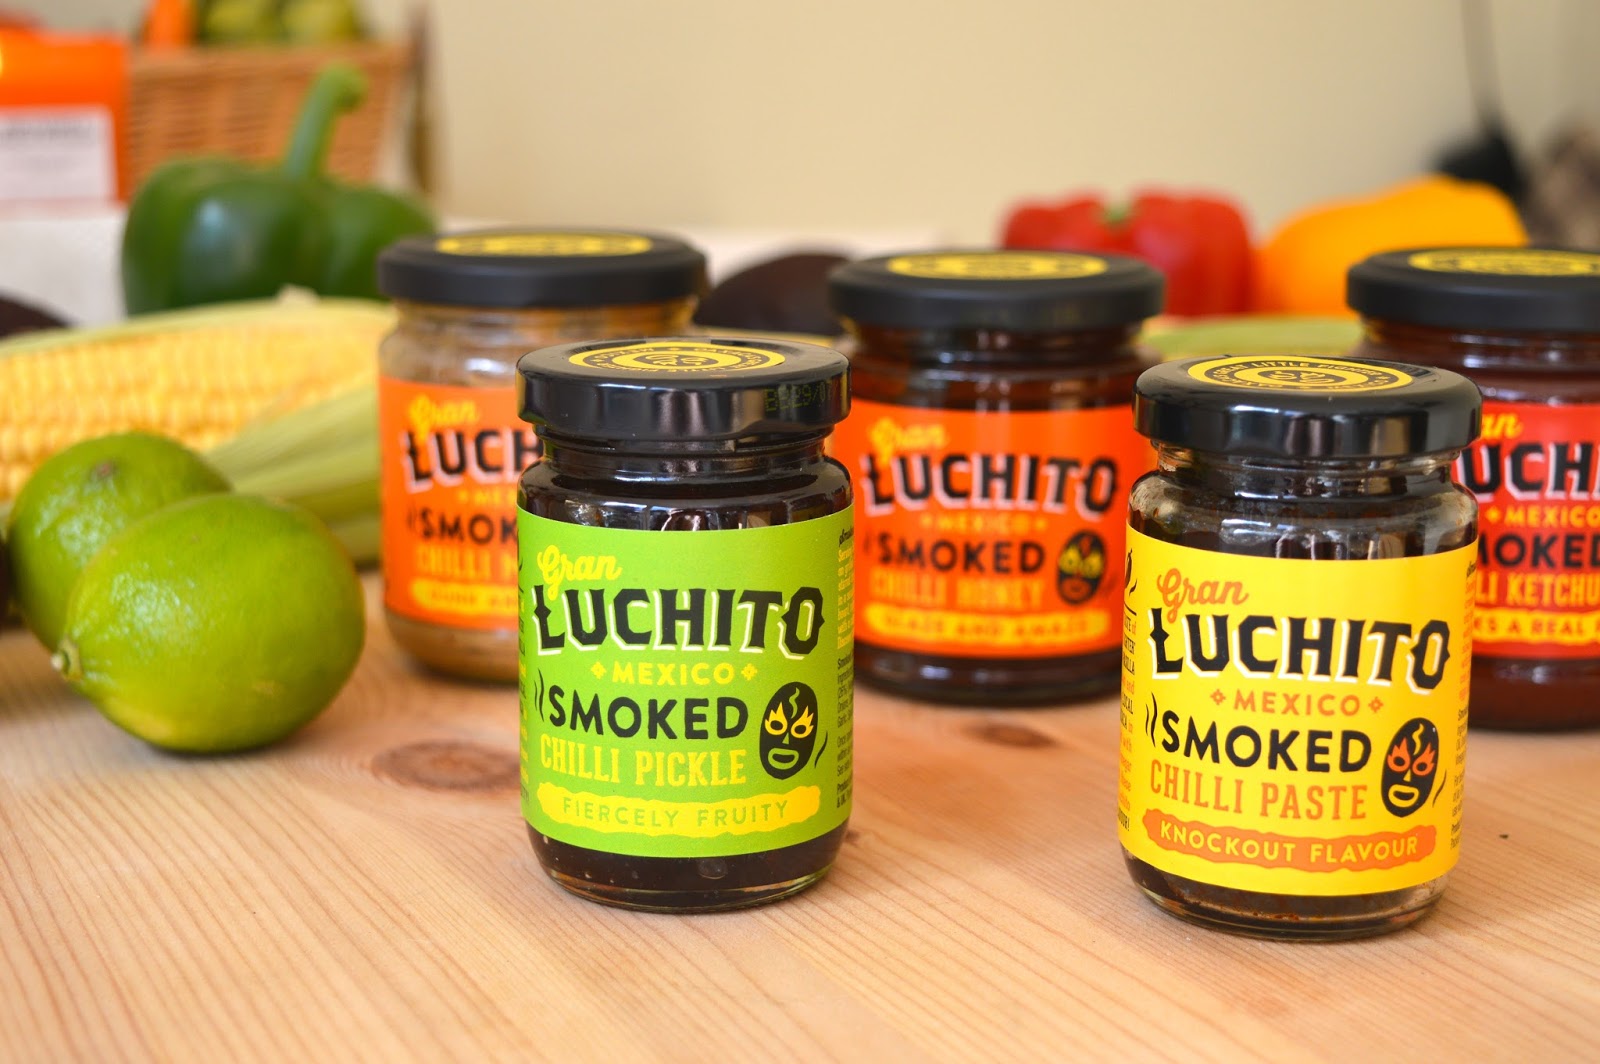 Mexican food recipes, Gran Luchito sauces, food bloggers, UK food blog, lifestyle bloggers, UK lifestyle blog